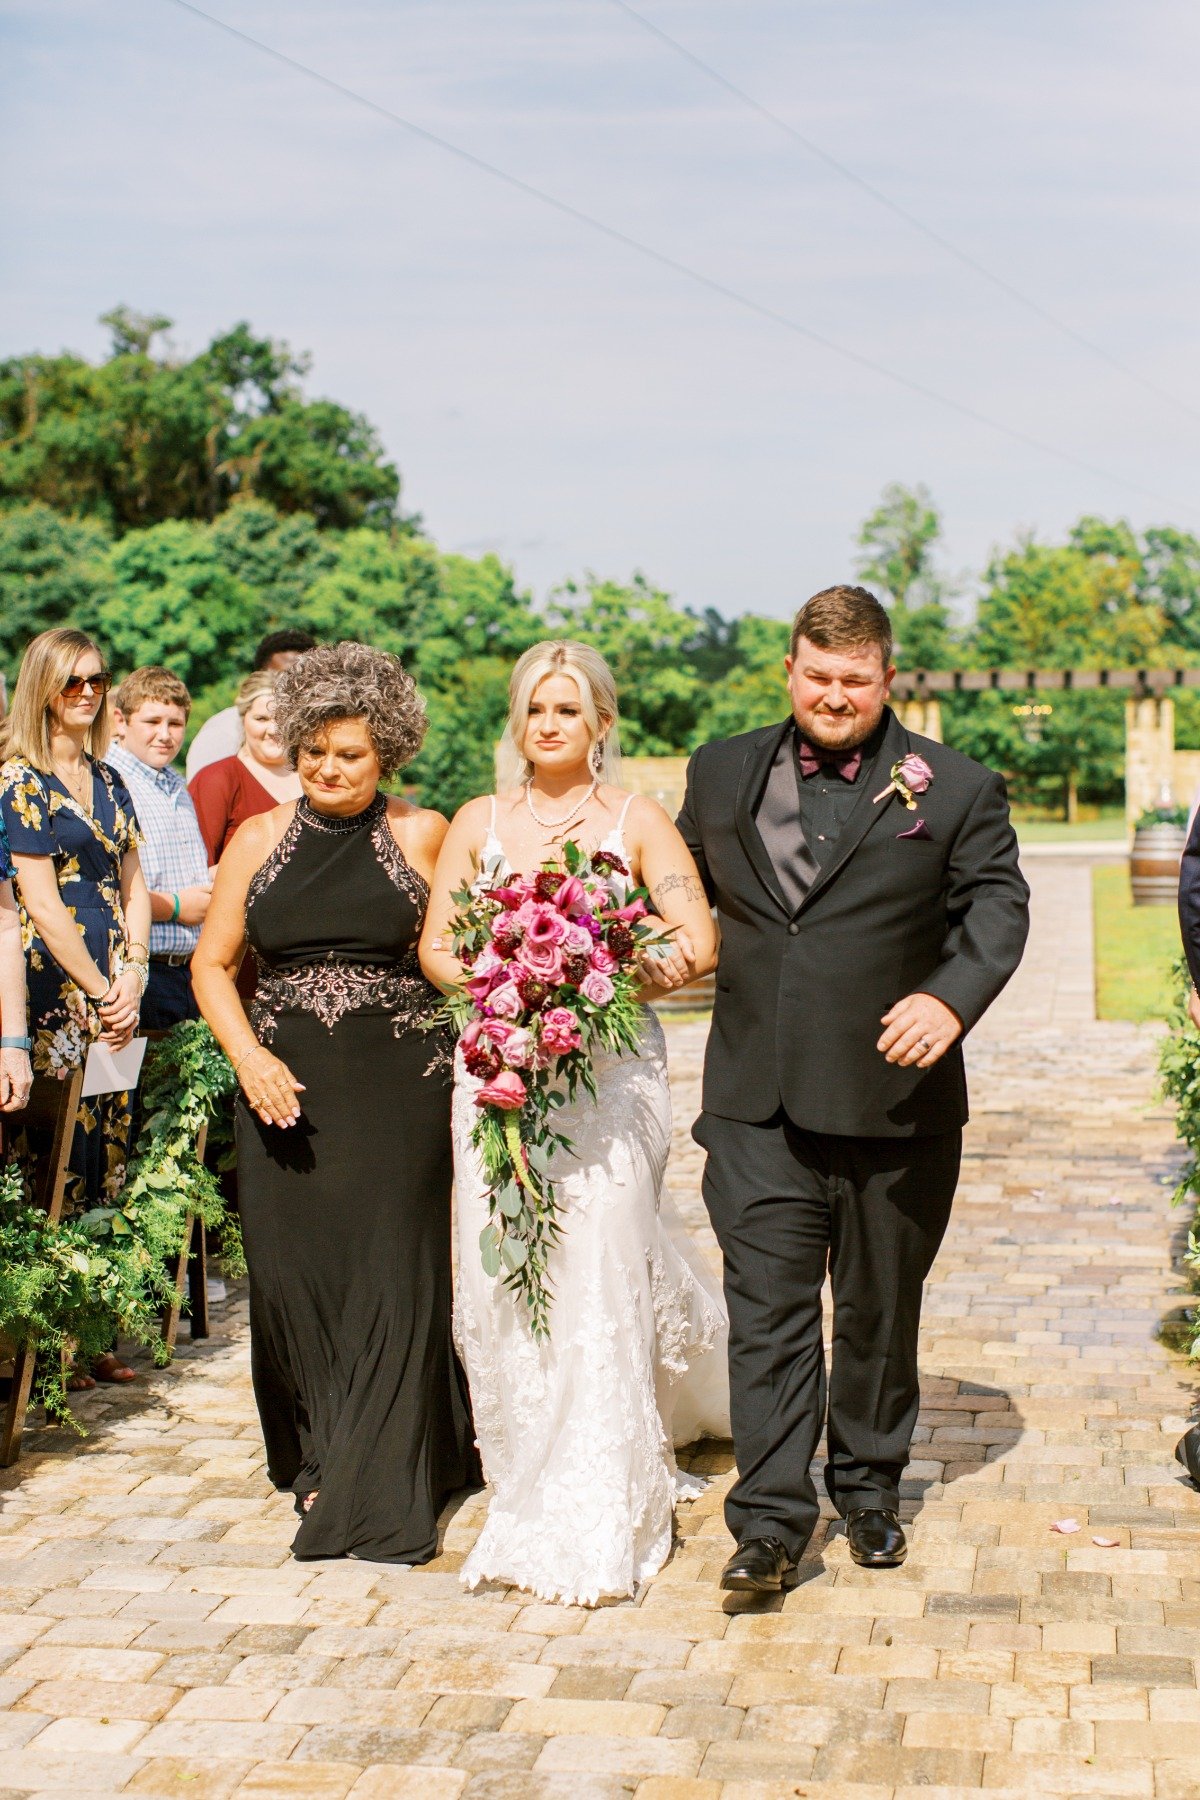 Emotional Mom and Brother Walking Bride Down Aisle